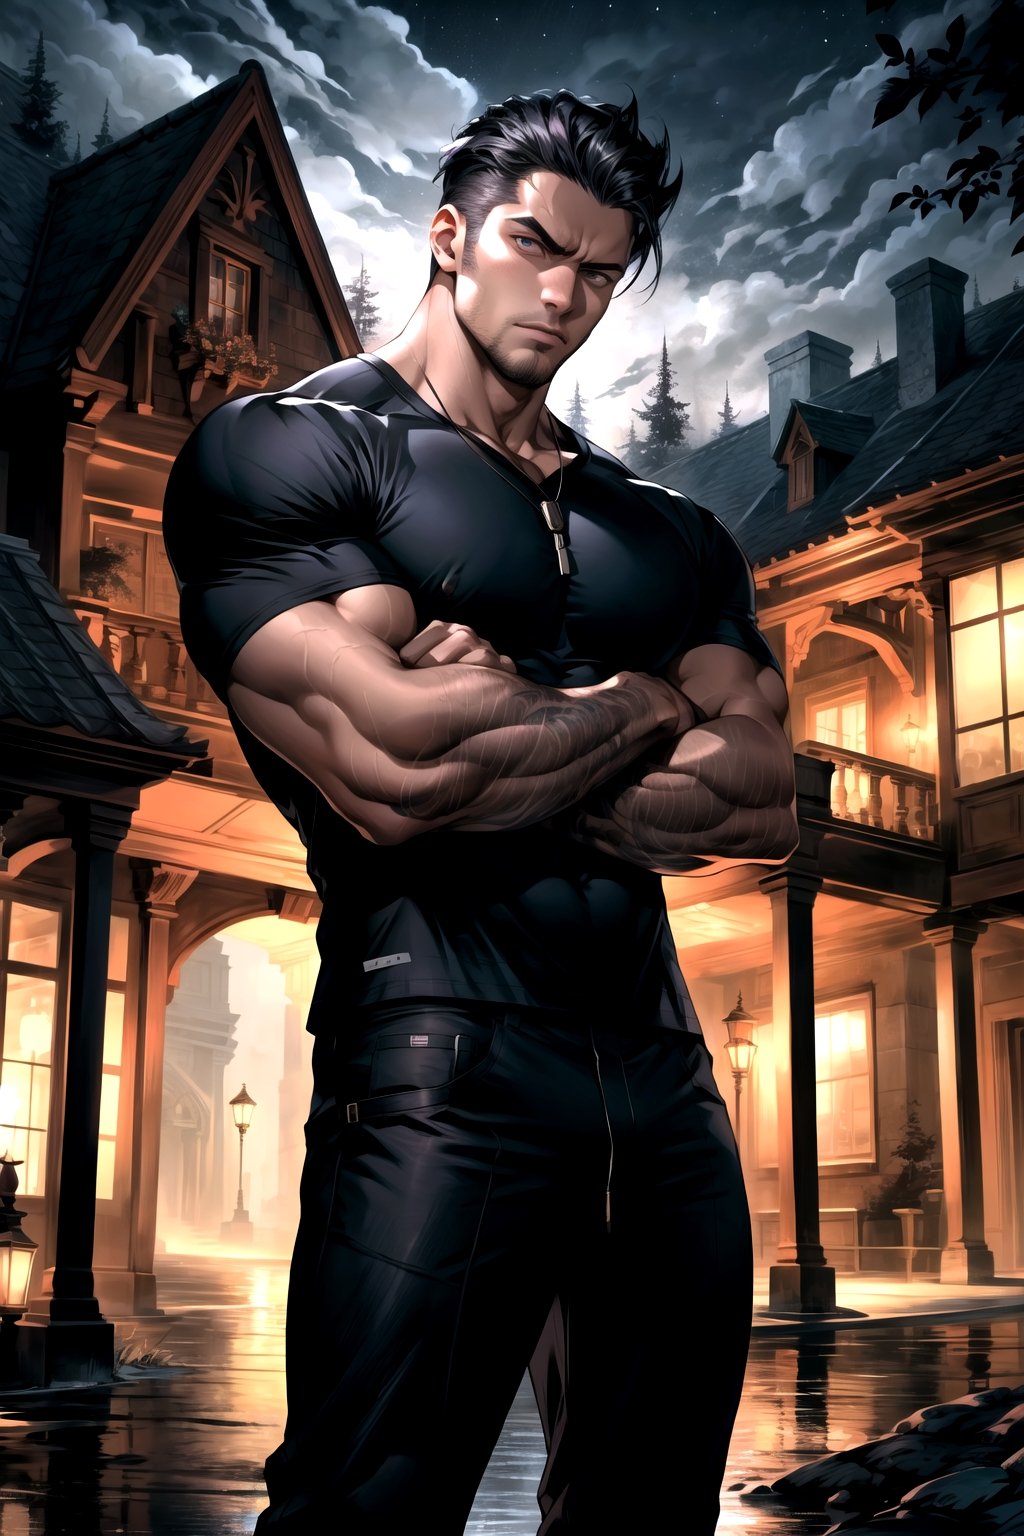 1 boy, serious look, night, mansion background with night trees, muscular t-shirt, black pants, muscular body, mix of fantasy and realism, ultra hd, hdr, 4k